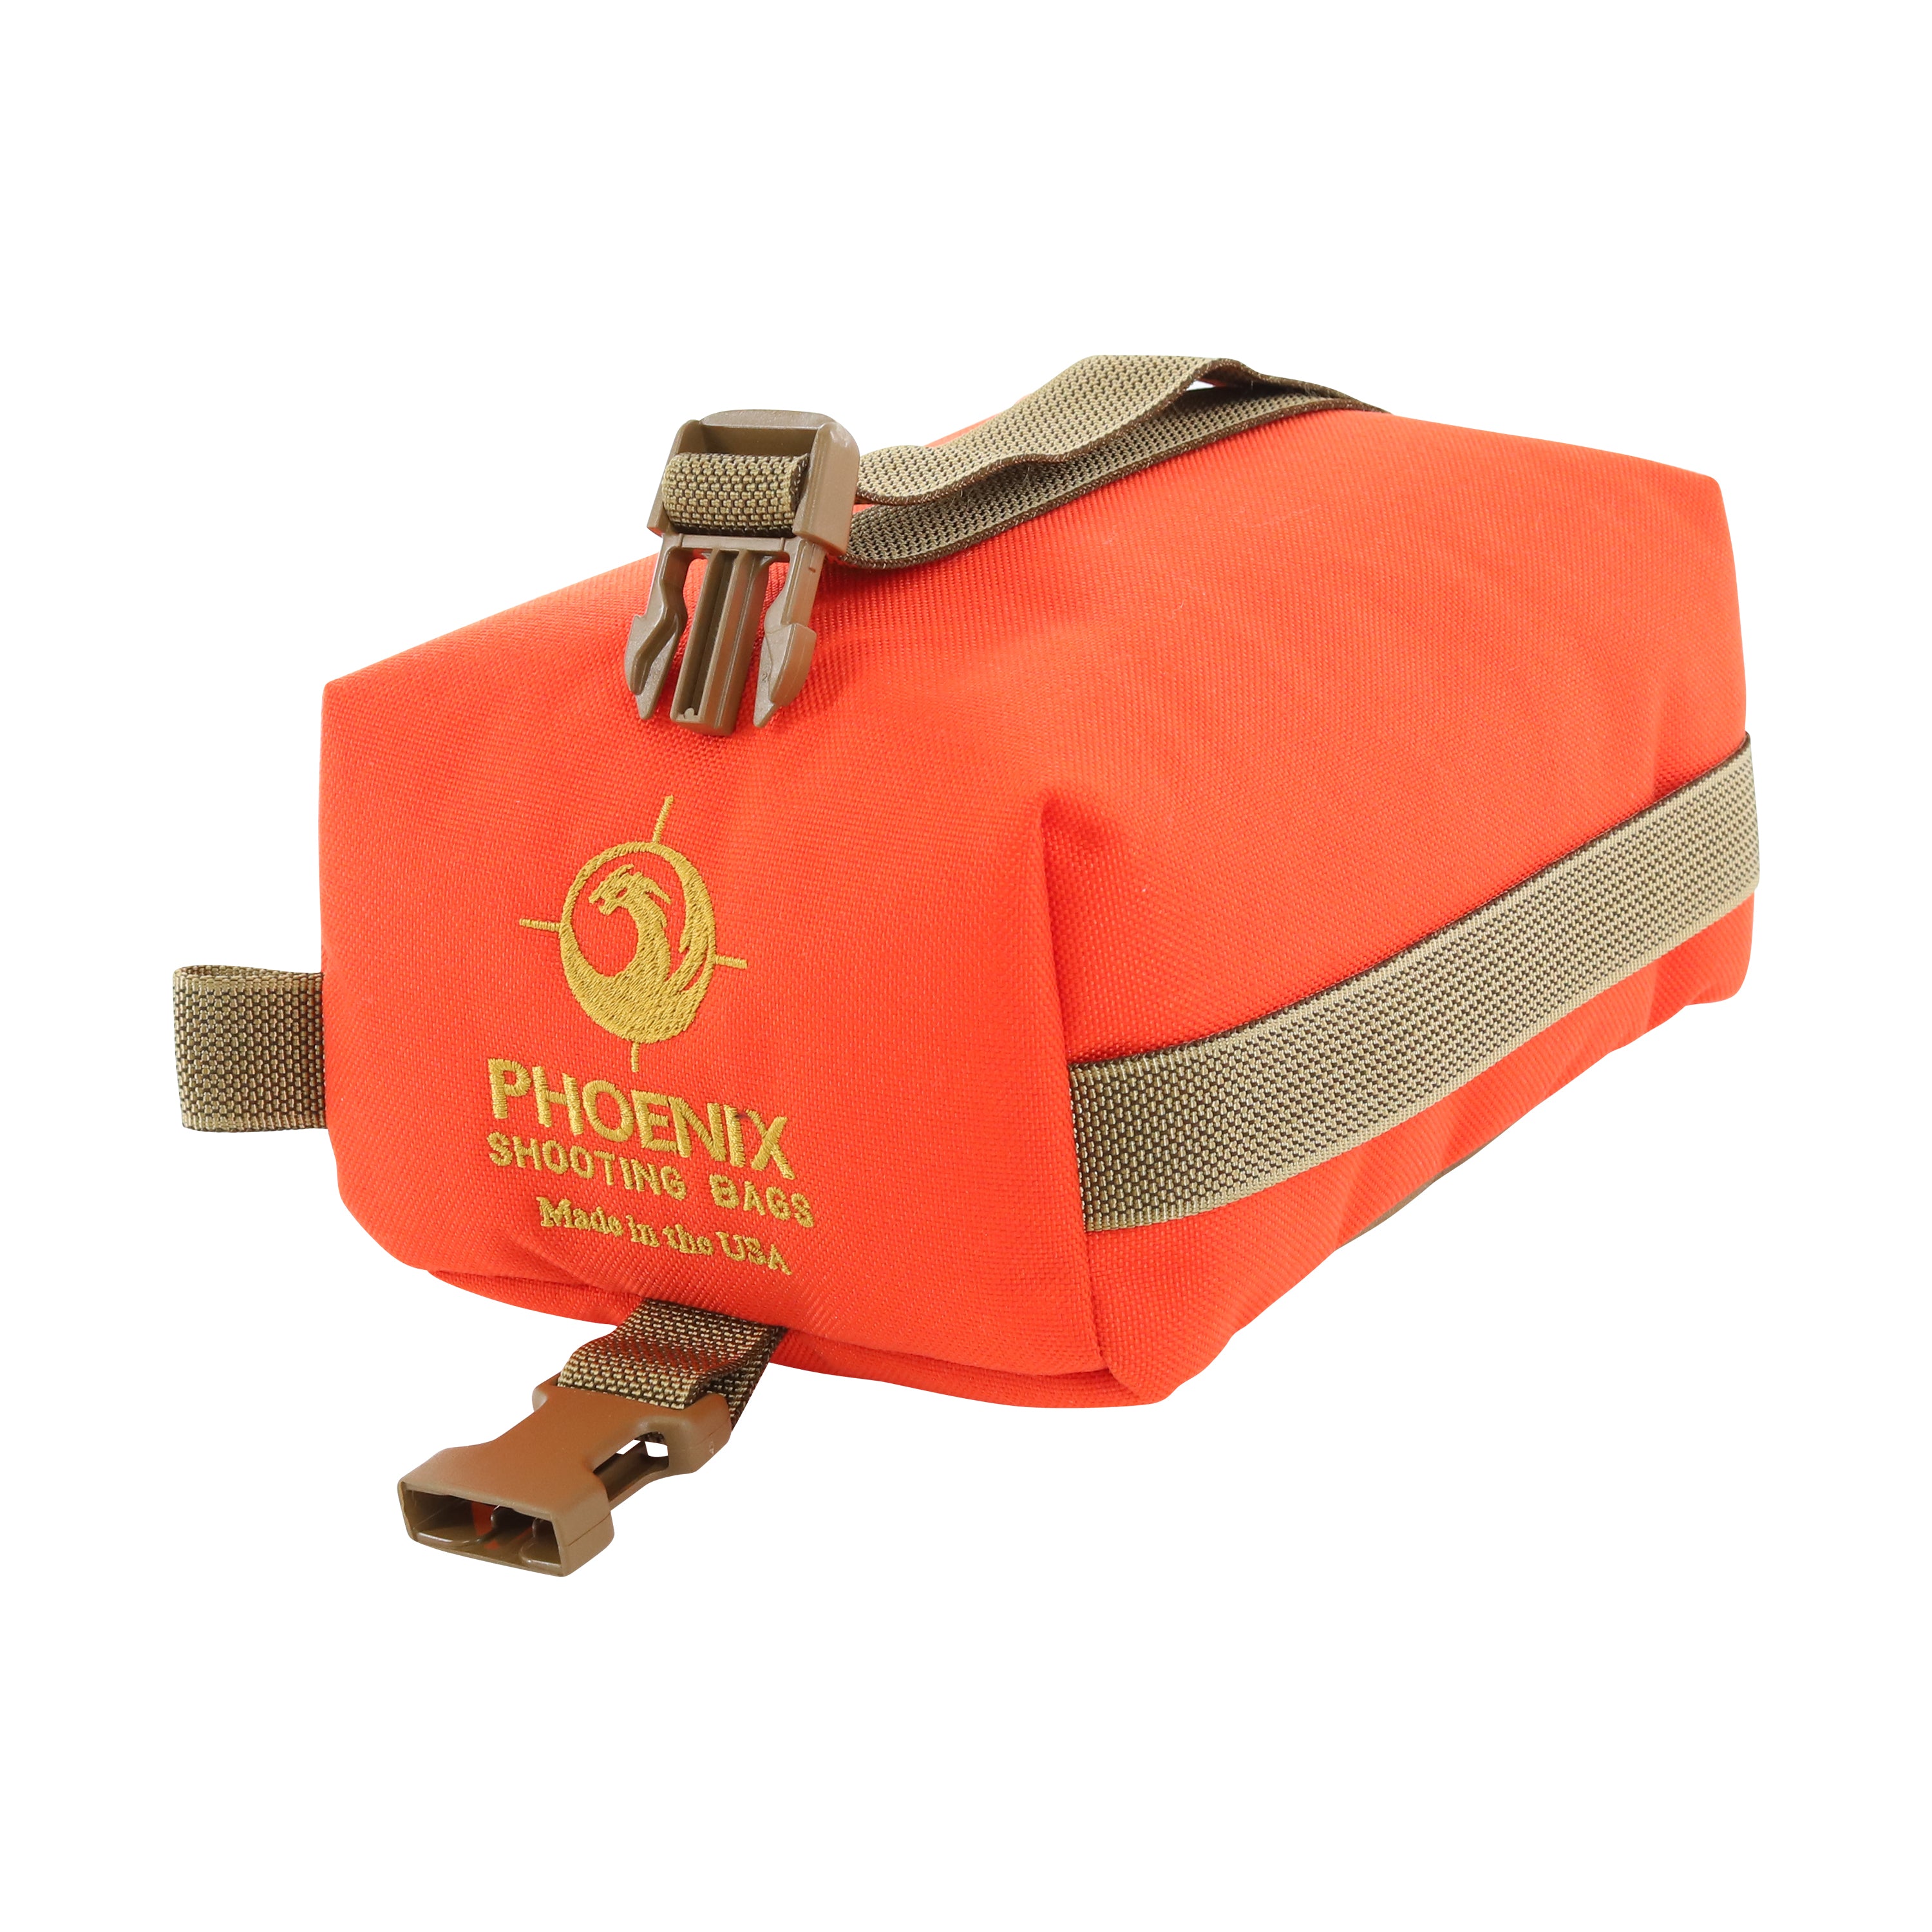 SHOPEE Branded Nylon DSLR Camera Lens Waist Pack Carrying Case Bag Fanny  Packs Waterproof Hip Belt Bag Pouch for Hiking Climbing Outdoor  Photographer Shooting Traveling : Amazon.in: Bags, Wallets and Luggage